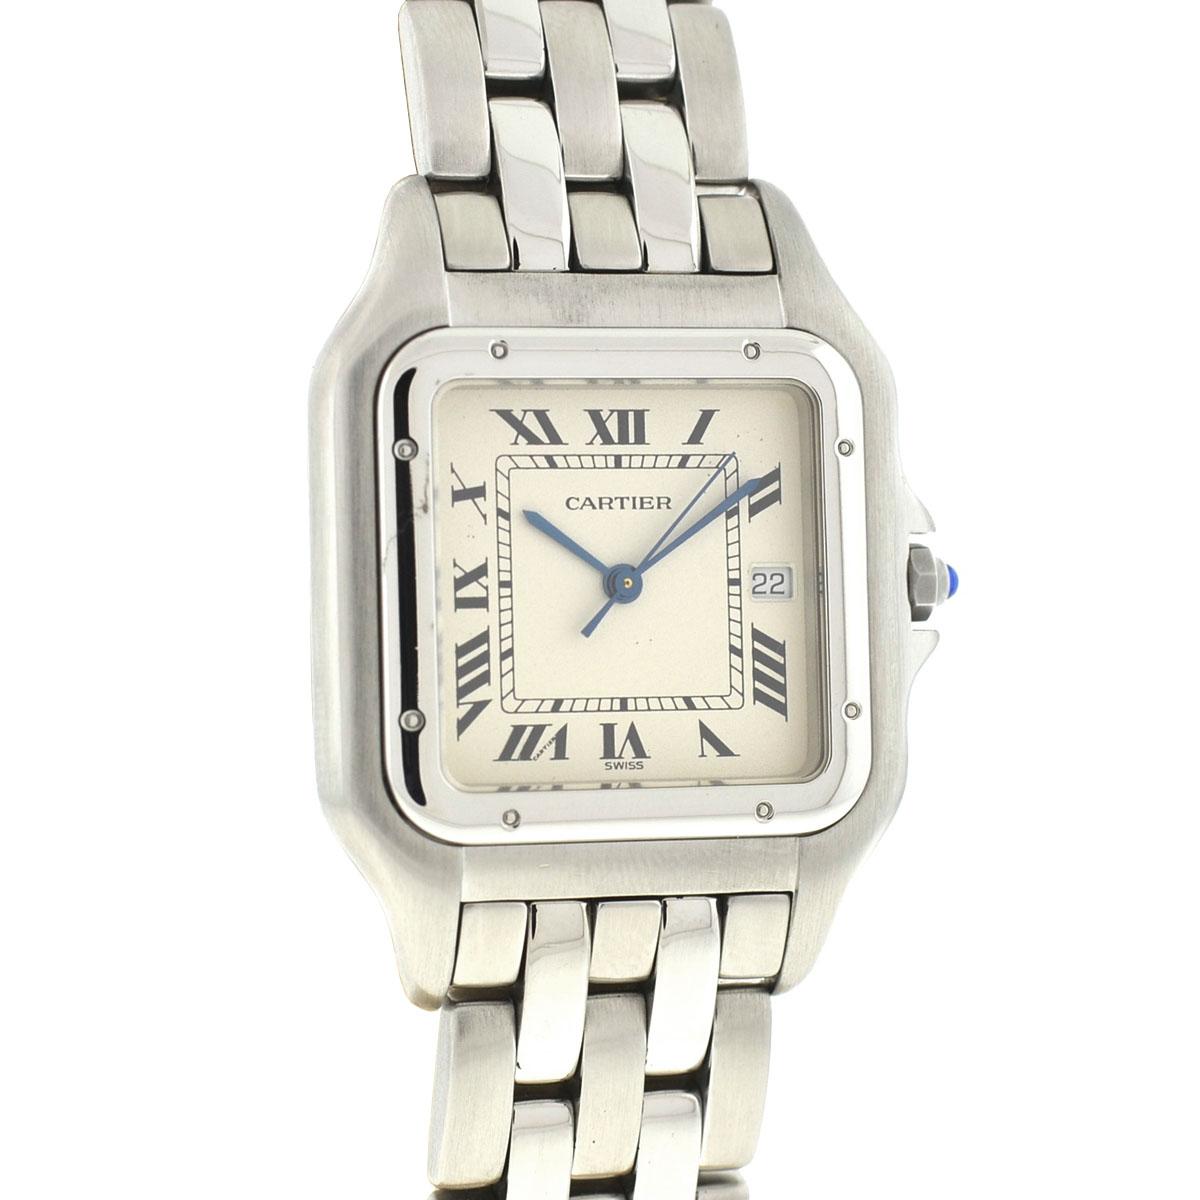 Company - Cartier
Model - 1300 Panthere
Case Metal - Stainless Steel
Case Measurement - 29mm
Bracelet - Stainless Steel - Fits wrist size 7